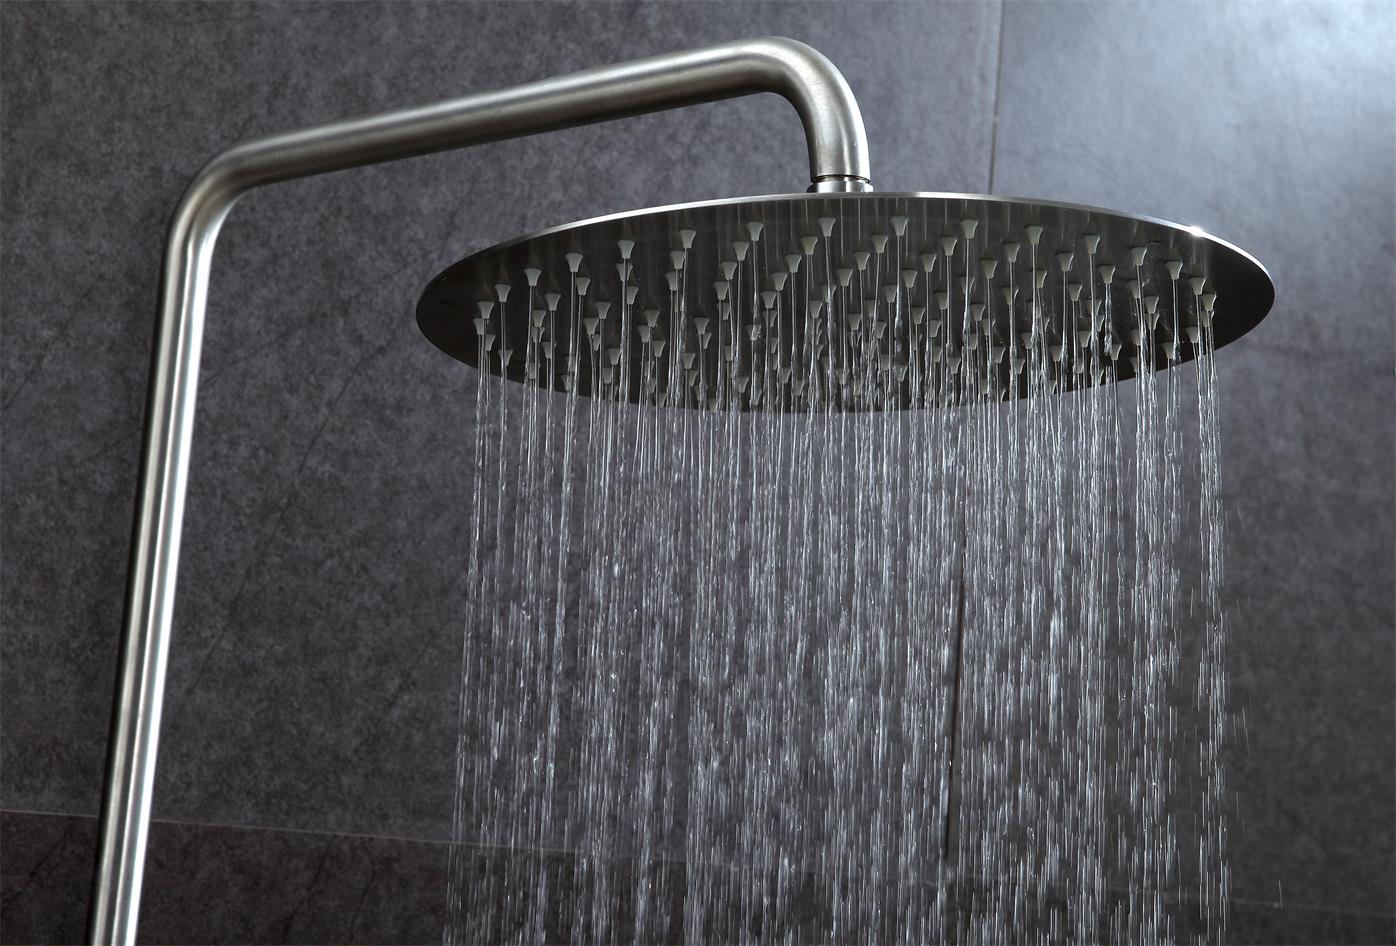 How to Choose Ionic Shower Bar？